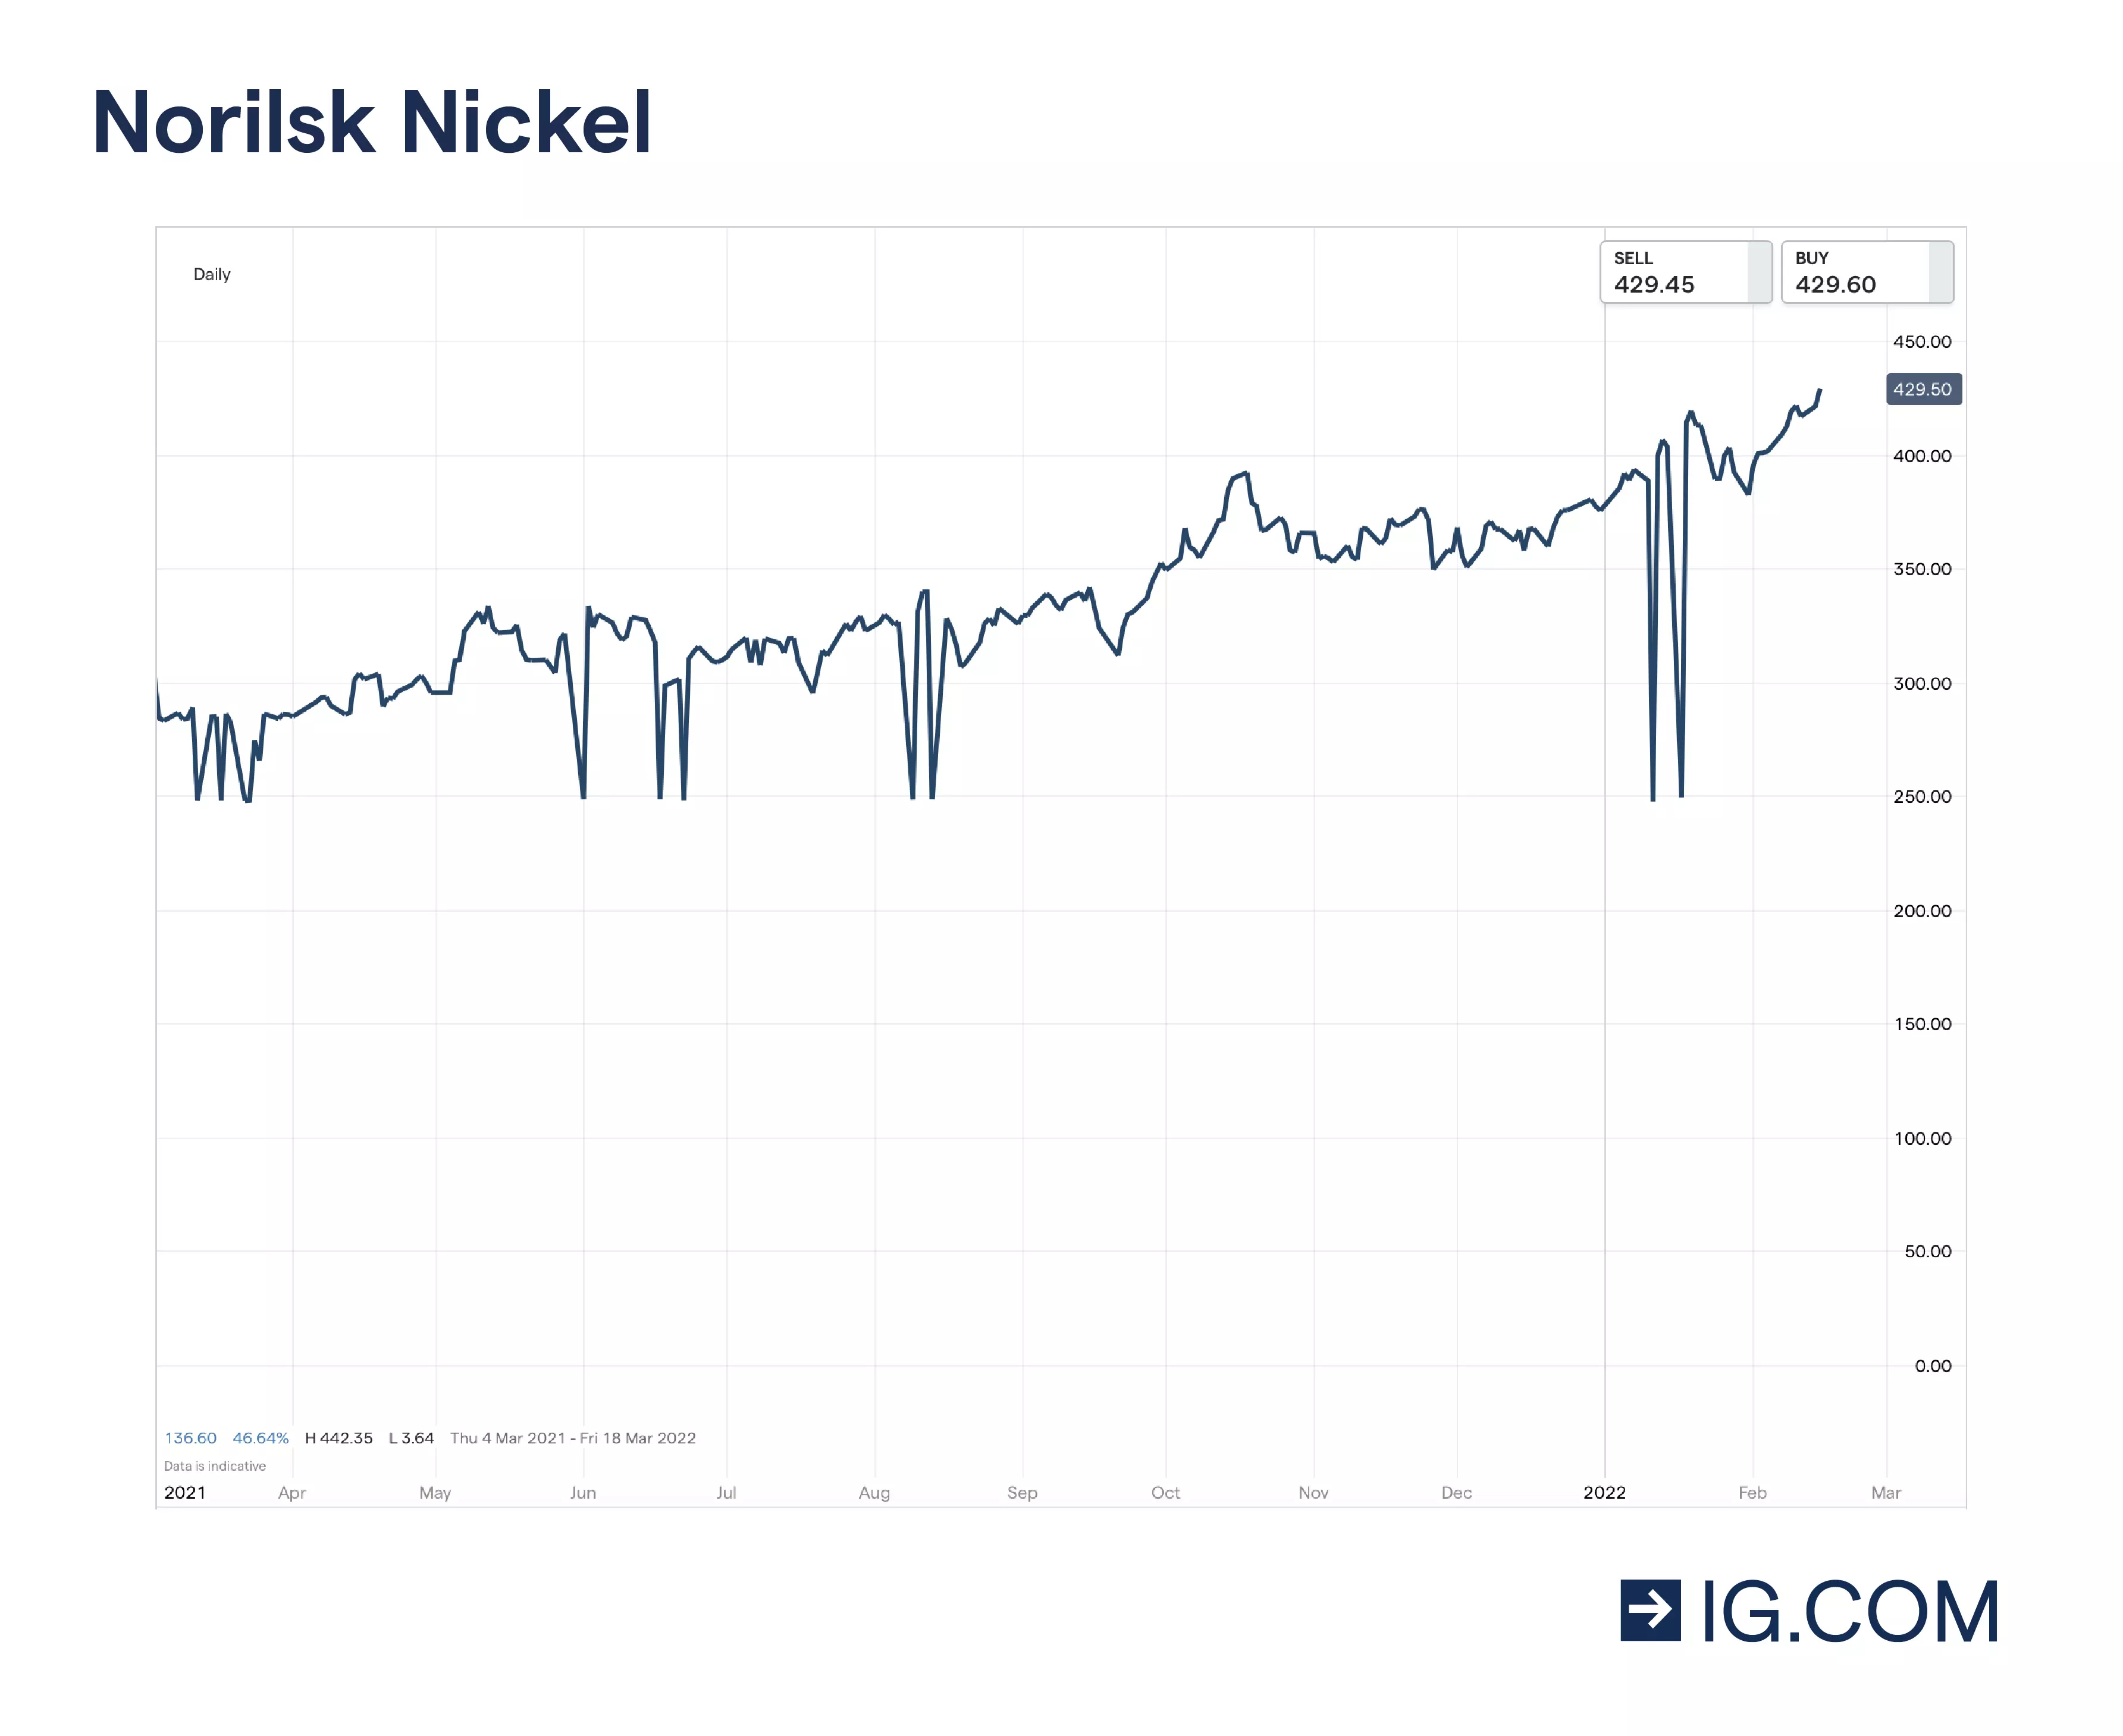 Norilsk Nickel stock chart showing different price points over 1 year timeline